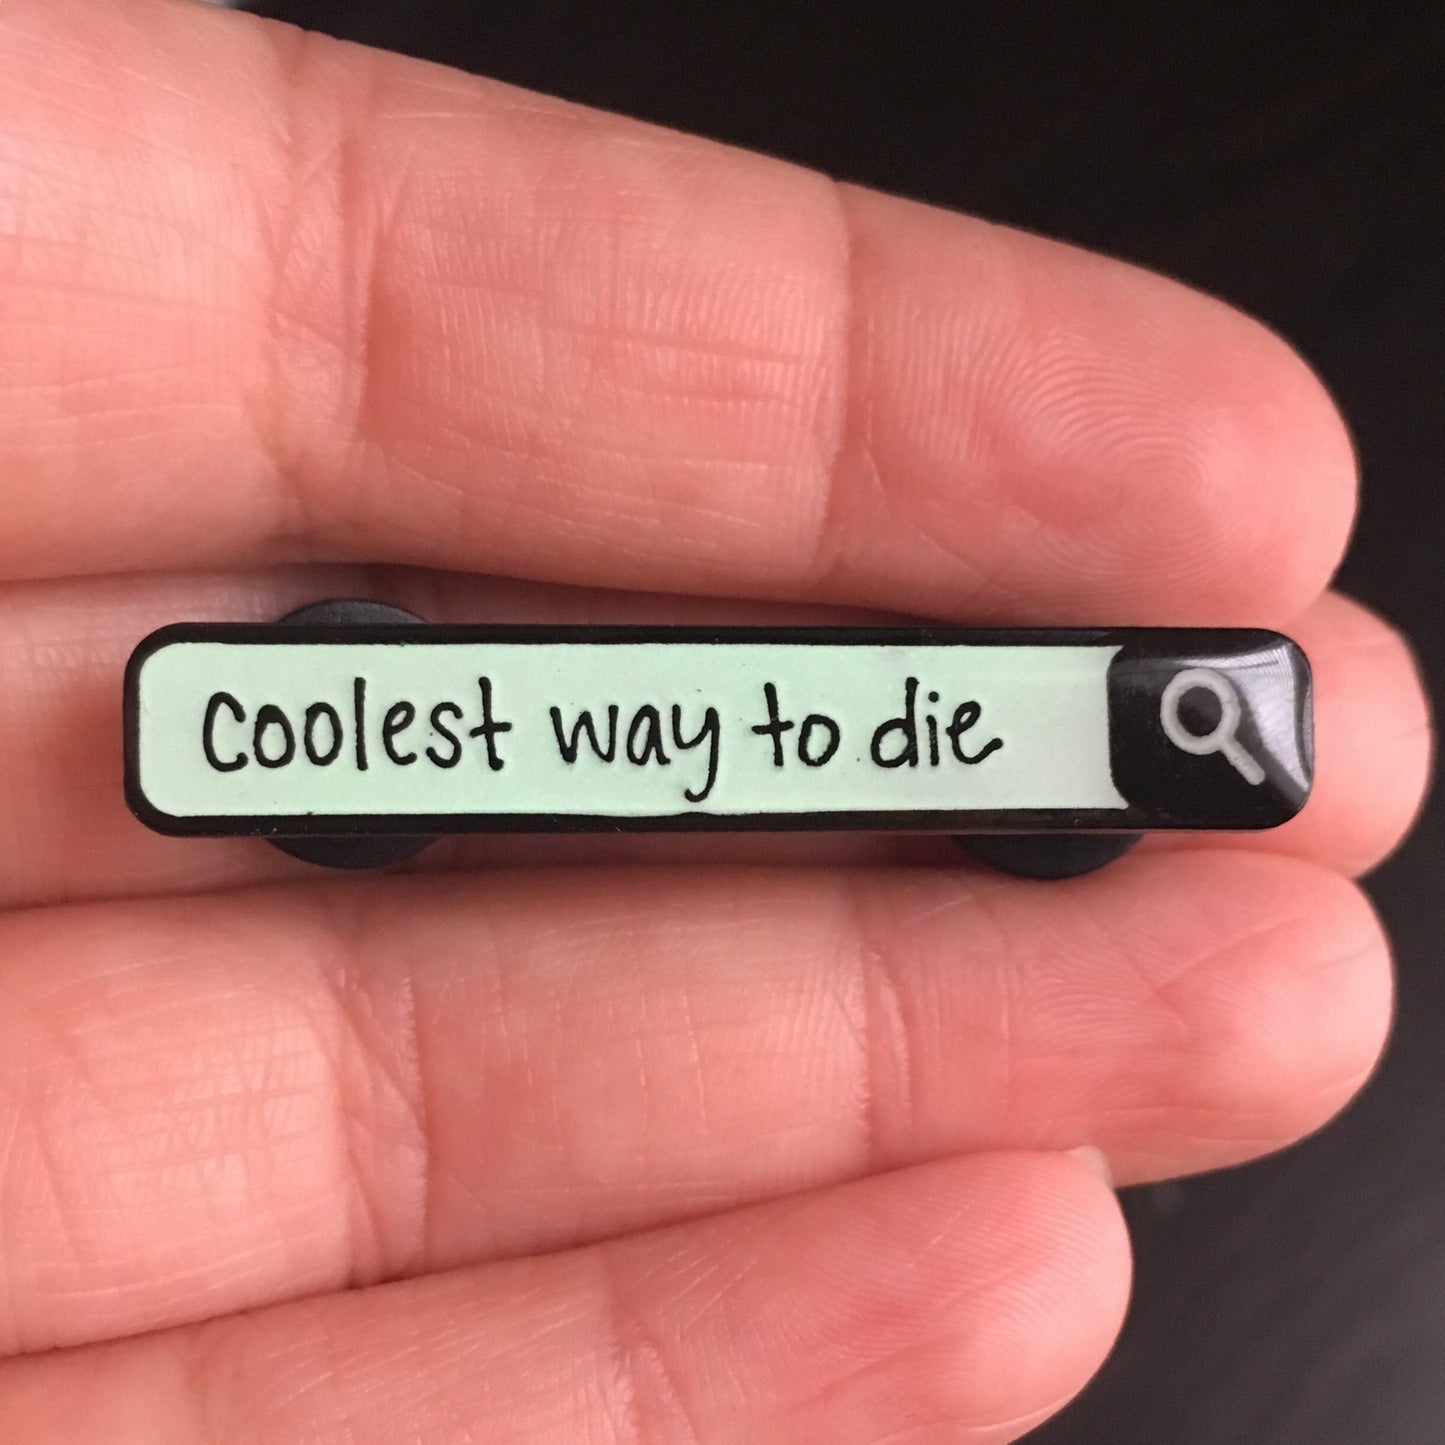 Coolest Way To Die - Search Bar Cool Death Enamel Pin